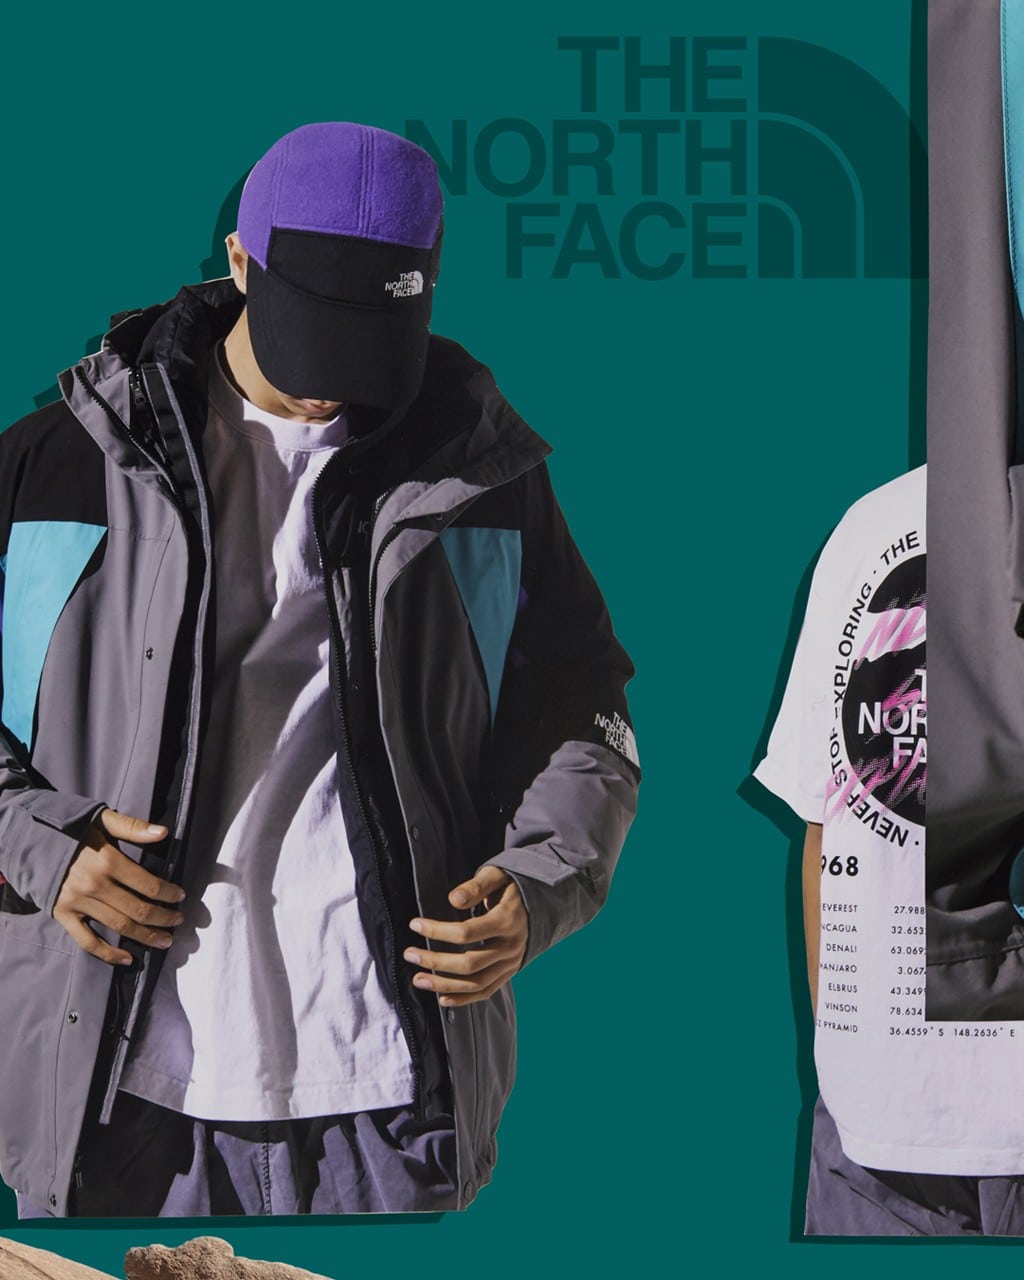 lookbook invincible x the north face the backstreet 2